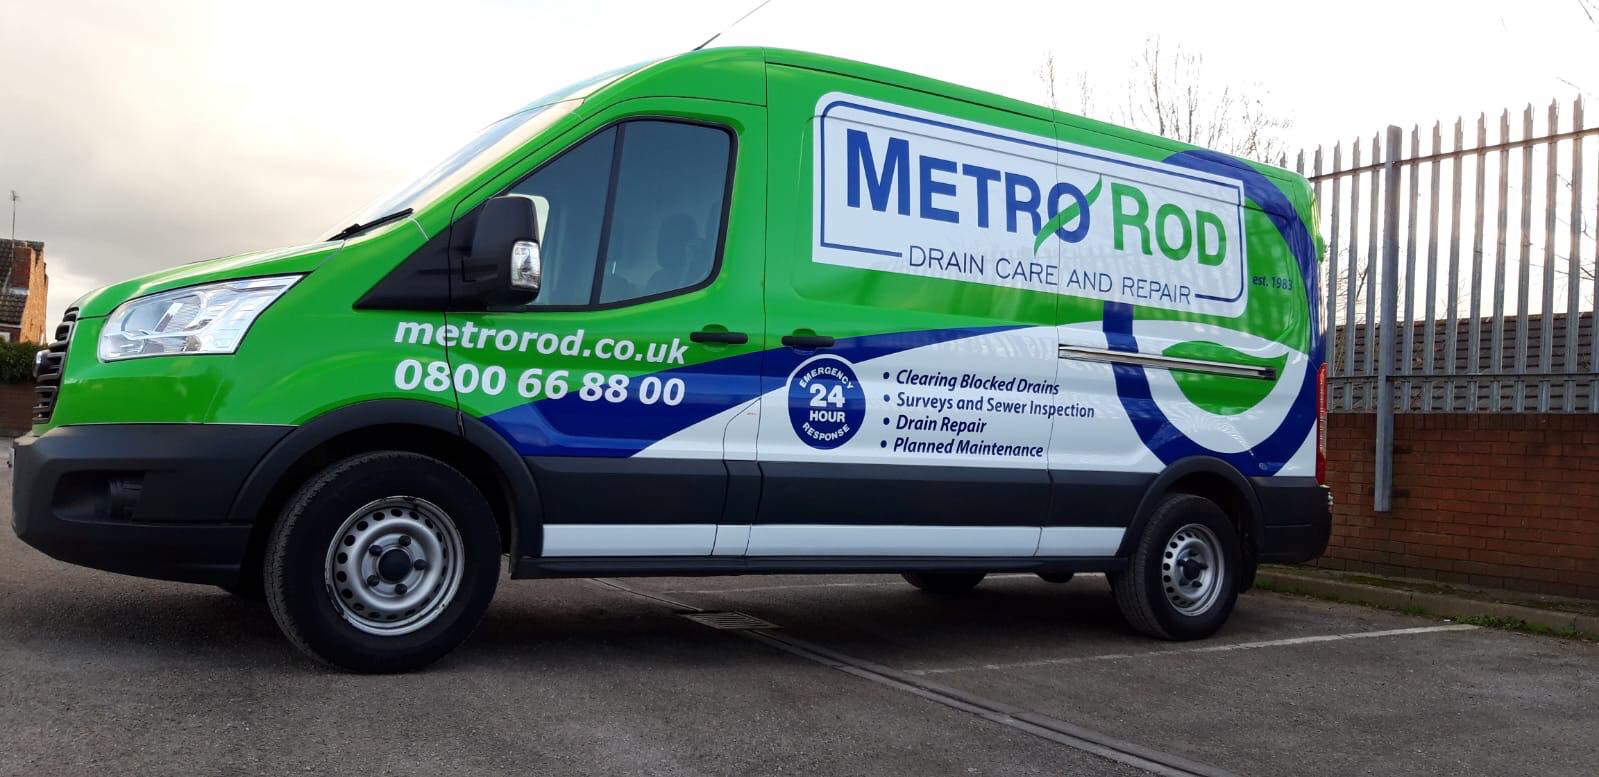 Another Drainage Van gets a Makeover!